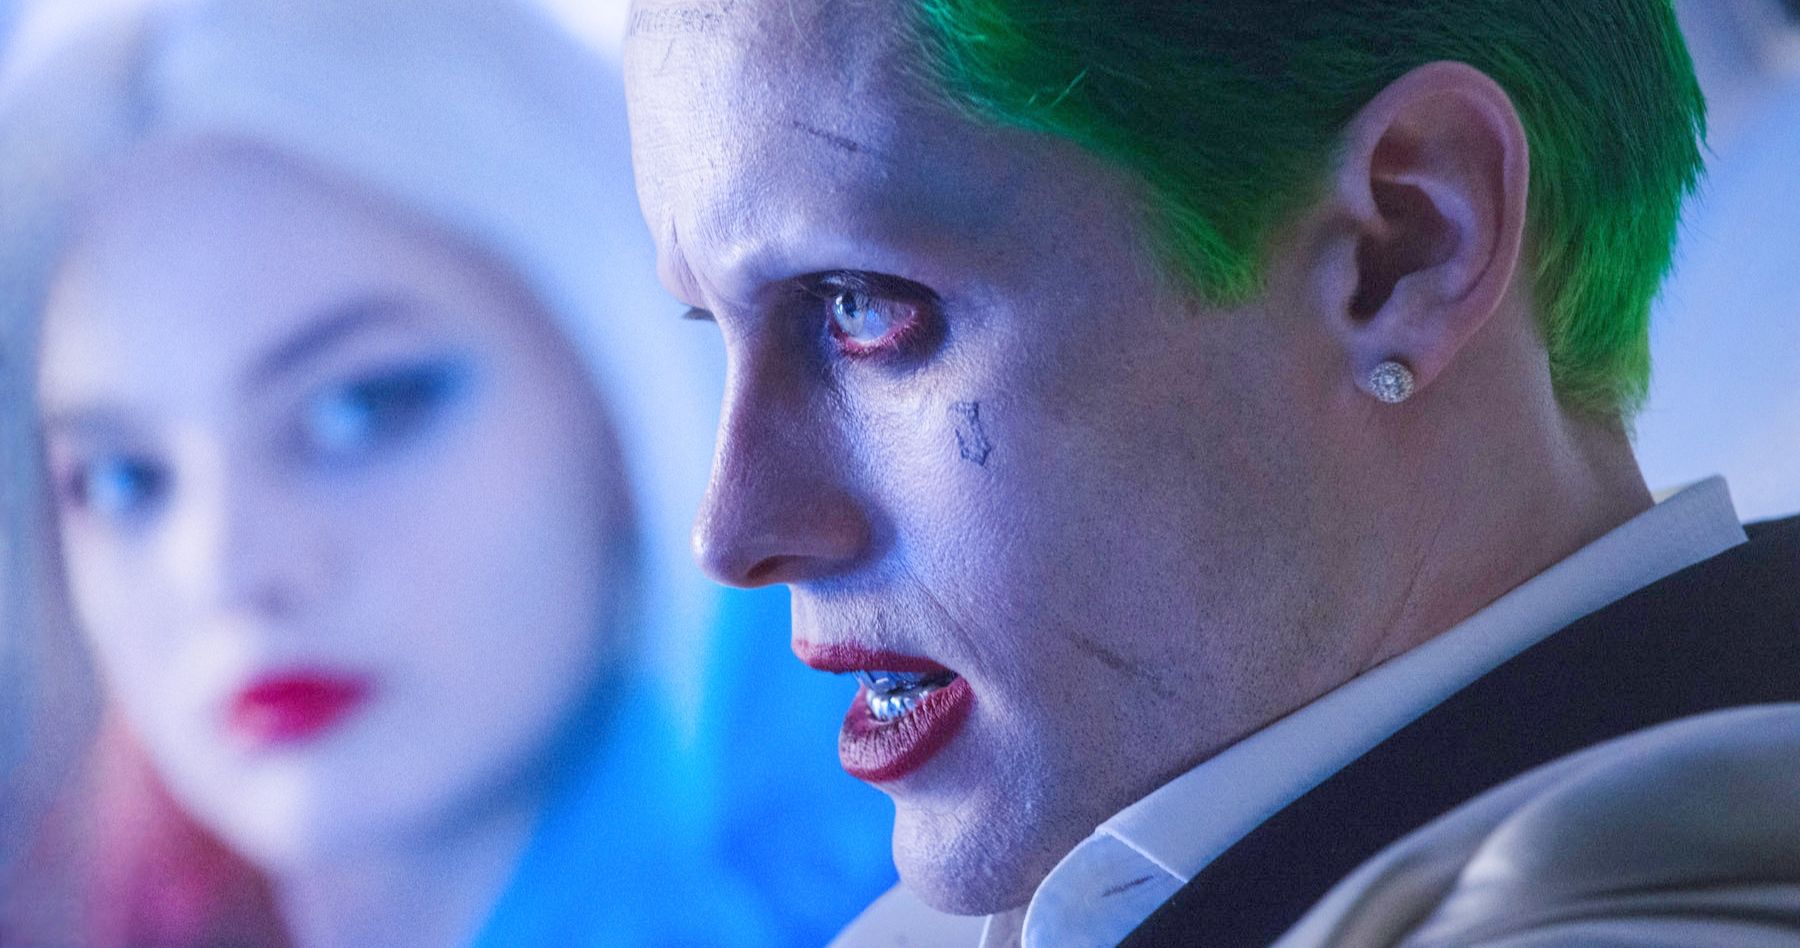 Suicide Squad Ayer Cut Image Has a New Look at Joker and Harley Quinn